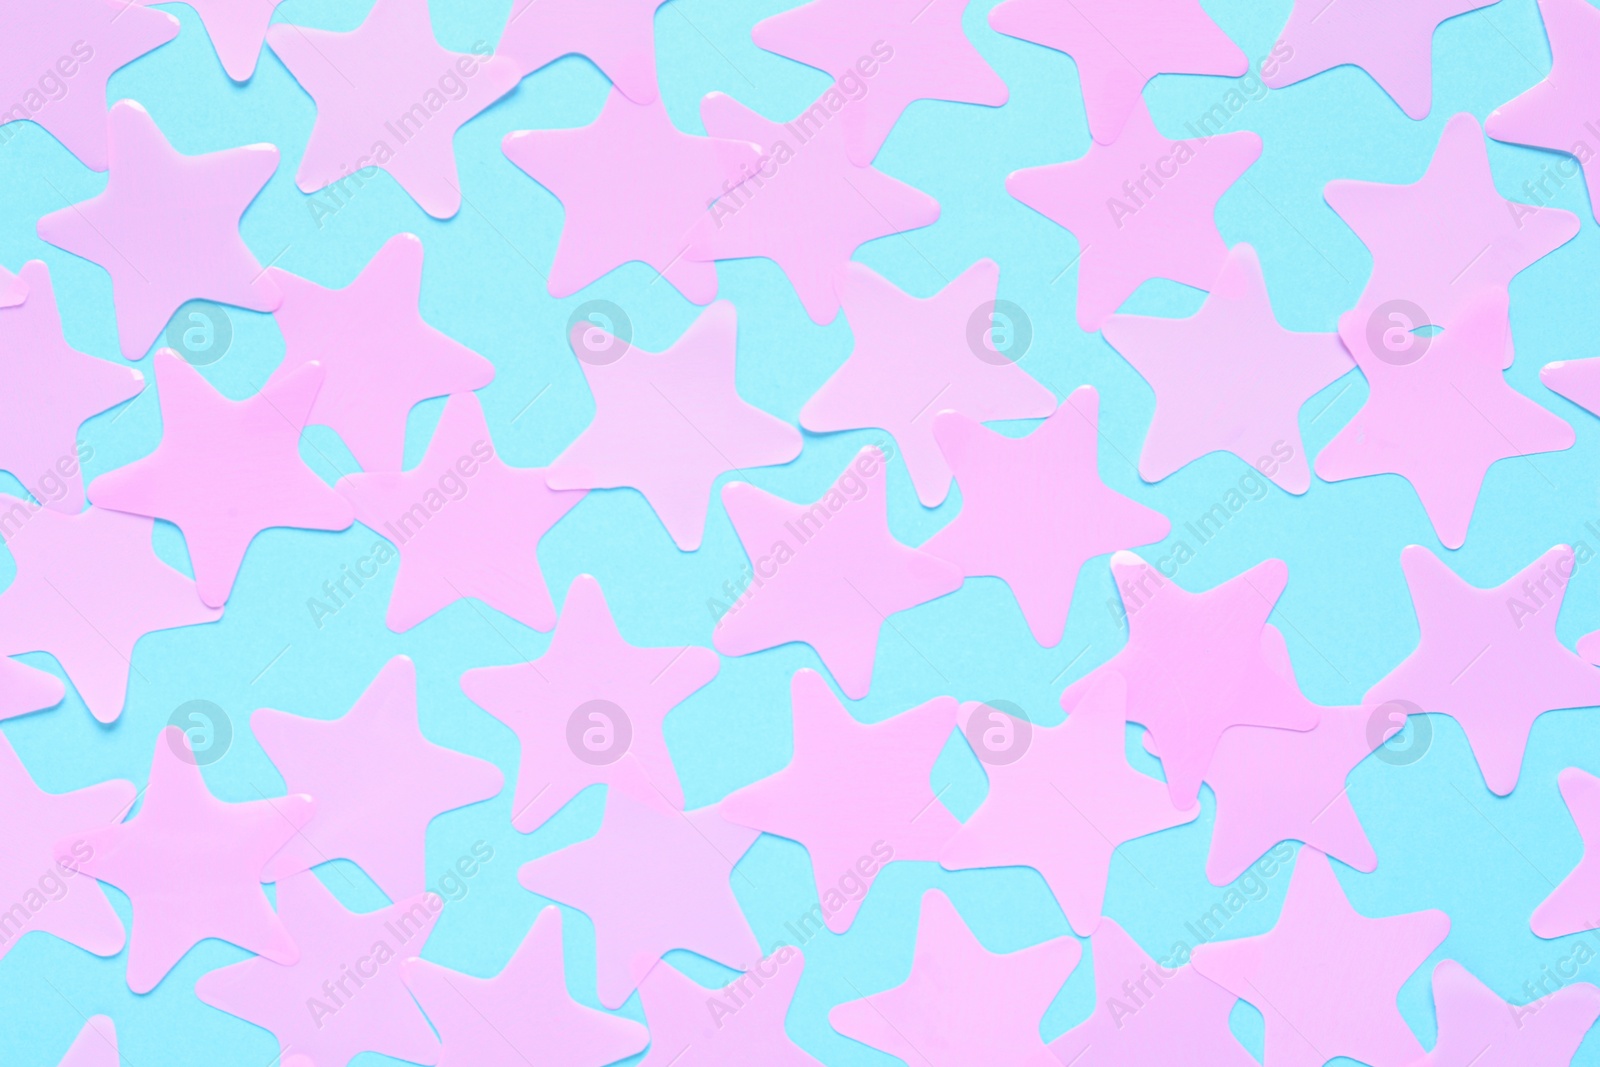 Photo of Pink star shaped confetti on light blue background, flat lay